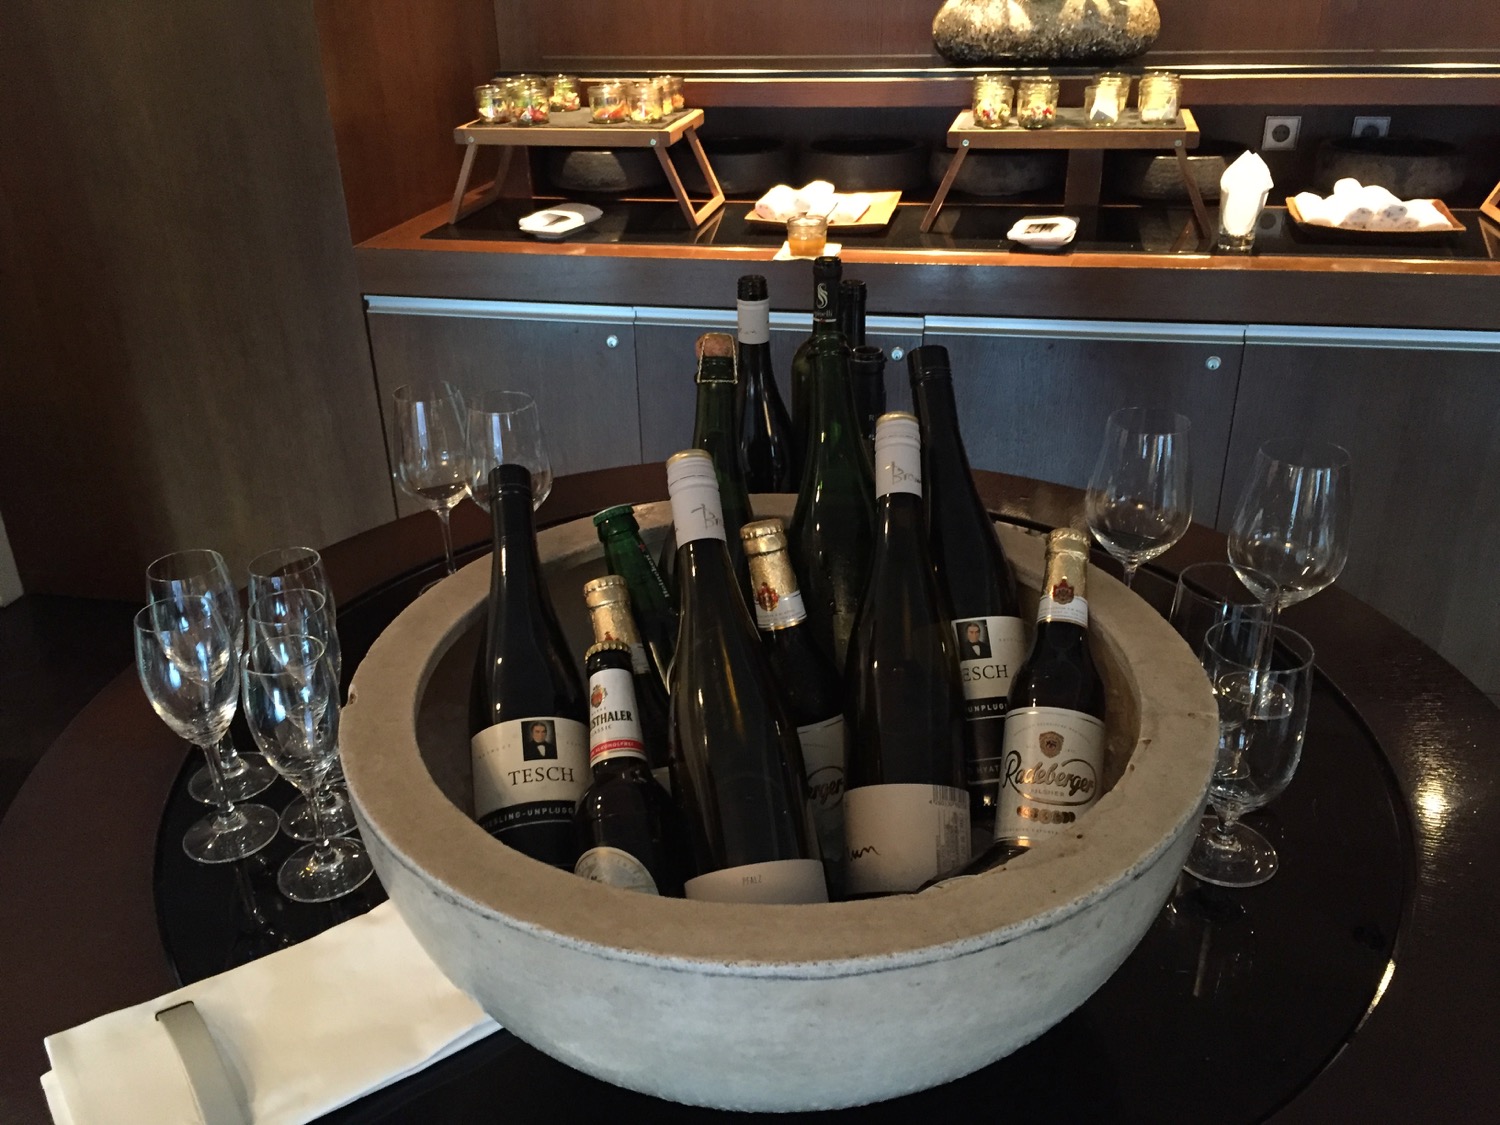 a bowl of wine bottles and glasses